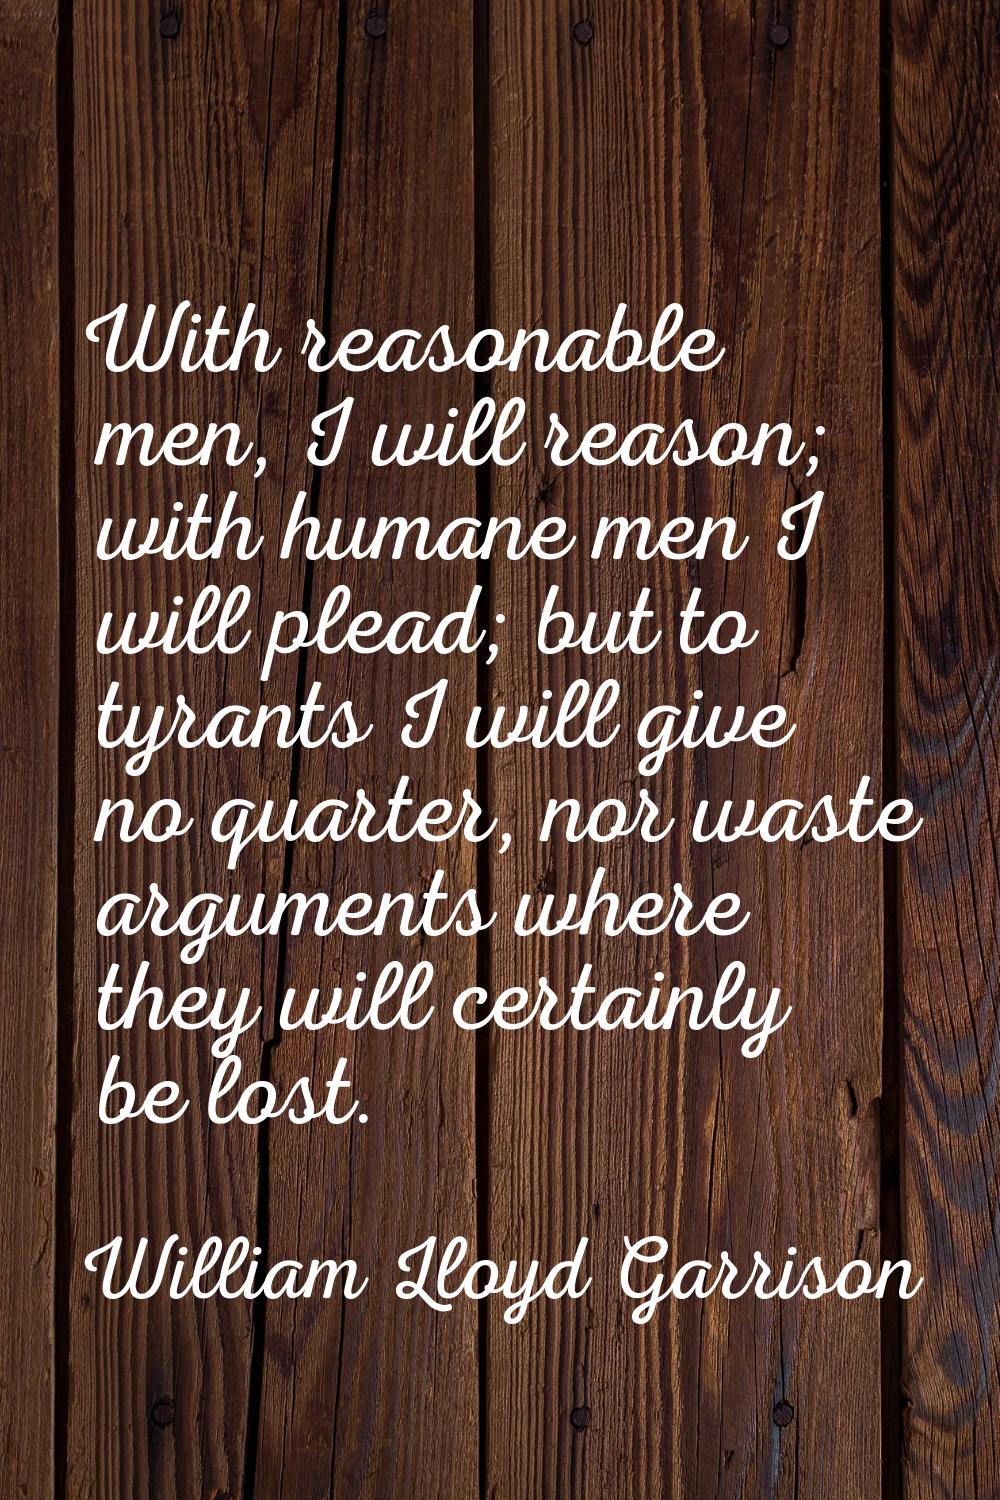 With reasonable men, I will reason; with humane men I will plead; but to tyrants I will give no qua